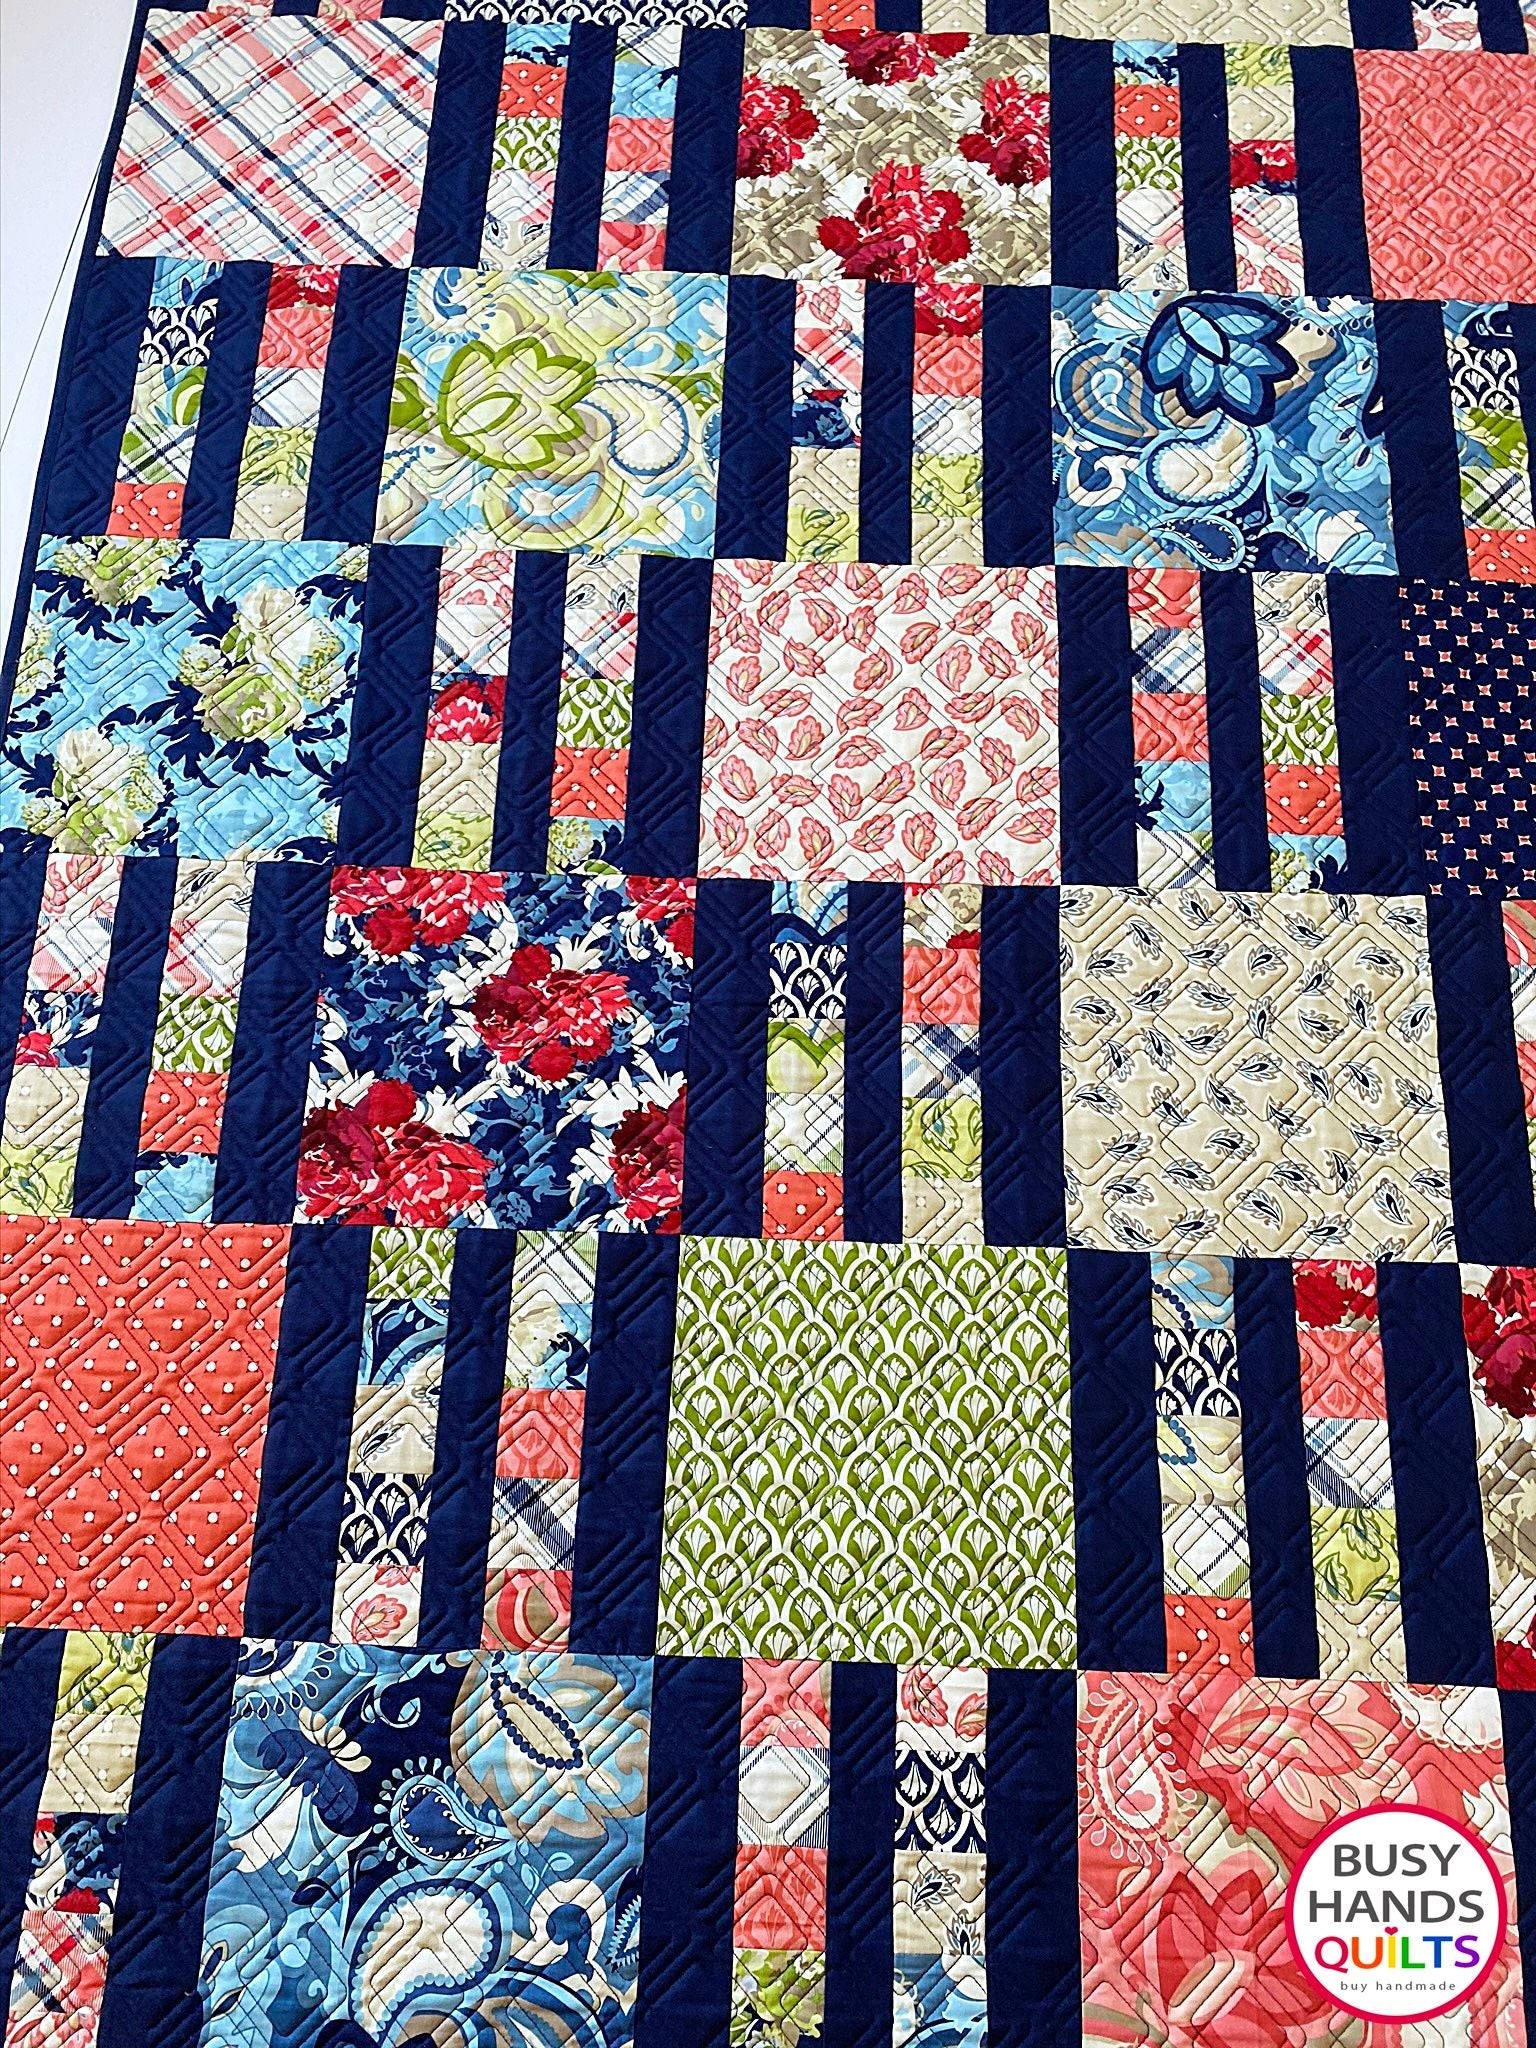 Handmade Picket Fence Rectangular Throw Quilt in Vintage Verona Busy Hands Quilts $289